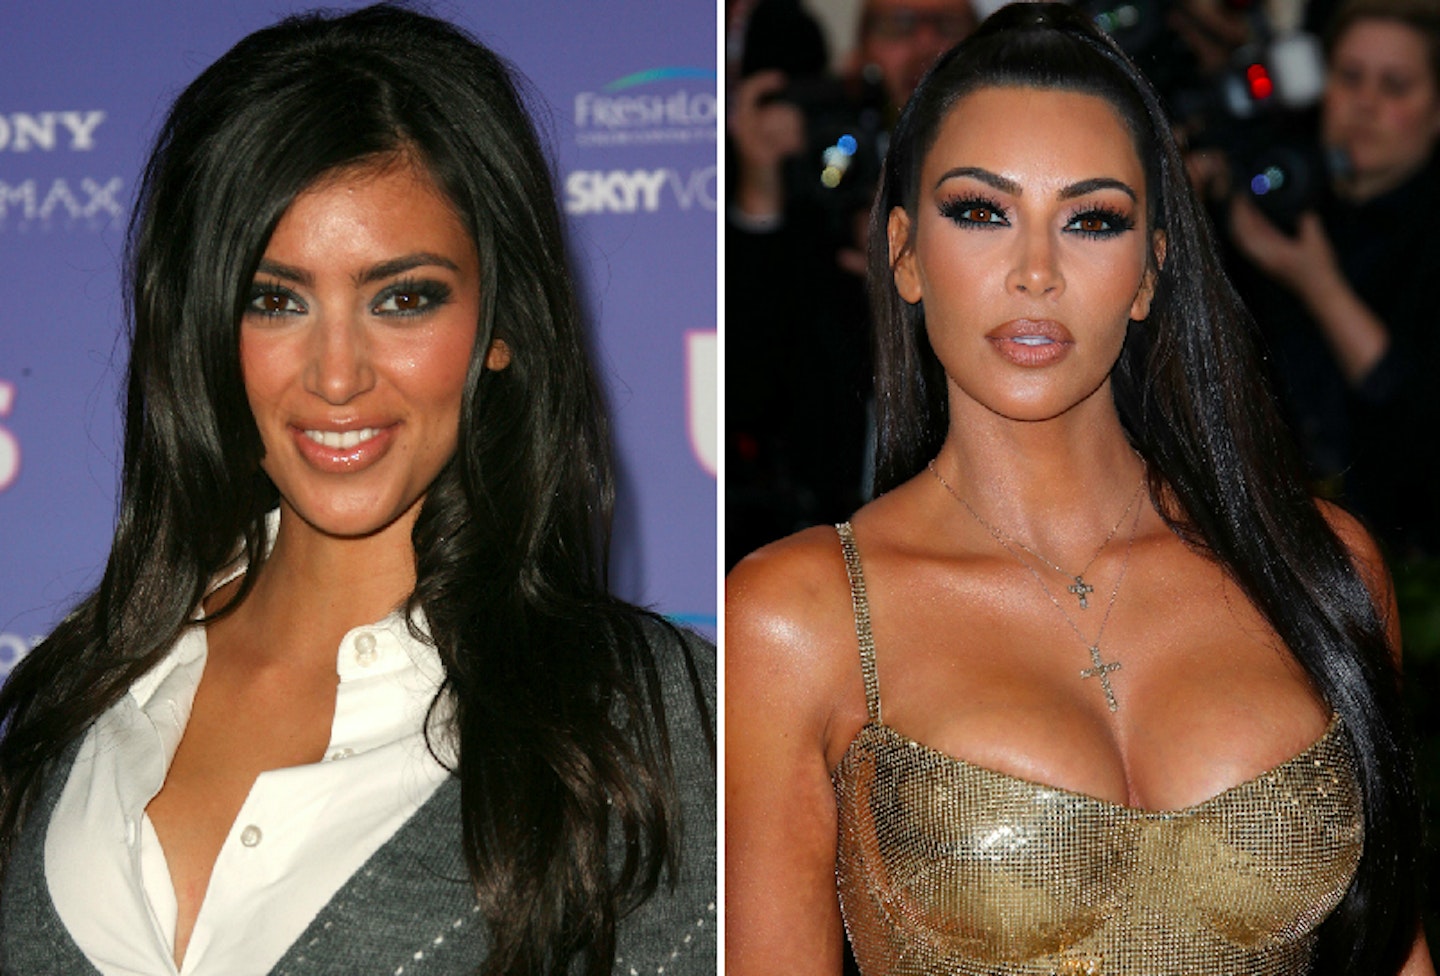 28 celebrities who look VERY different after plastic surgery